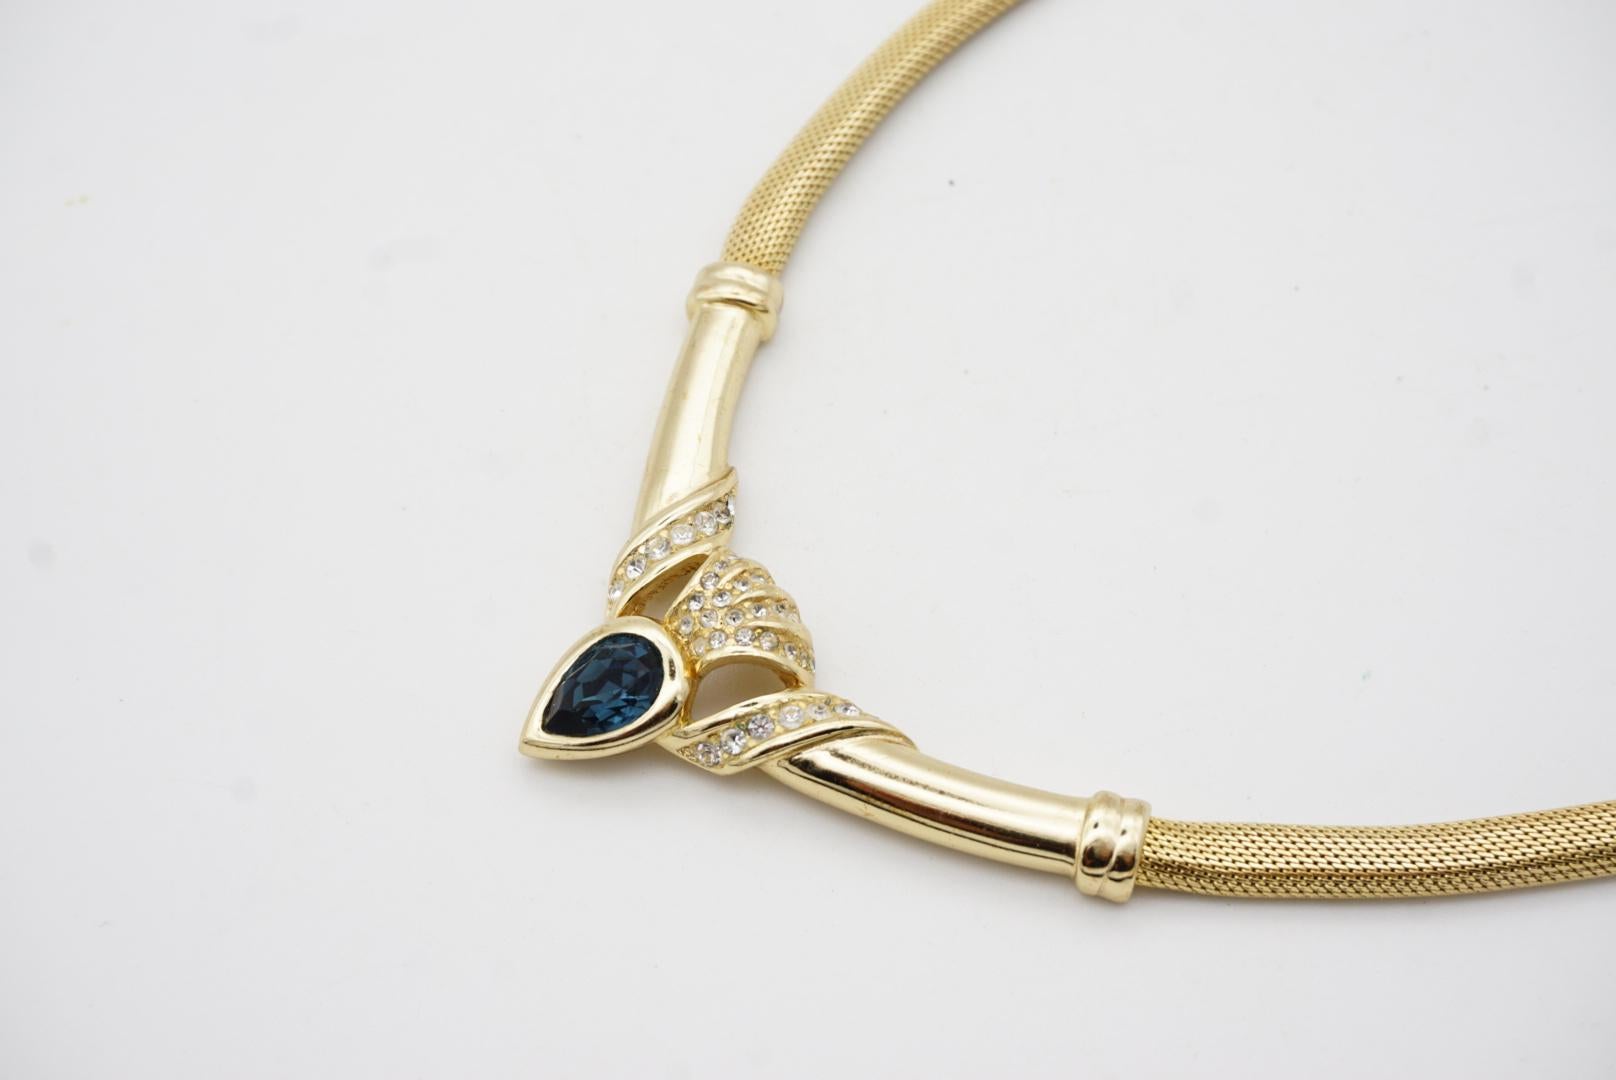 Christian Dior Vintage 1980s Sapphire Water Tear Drop Openwork Pendant Necklace For Sale 4